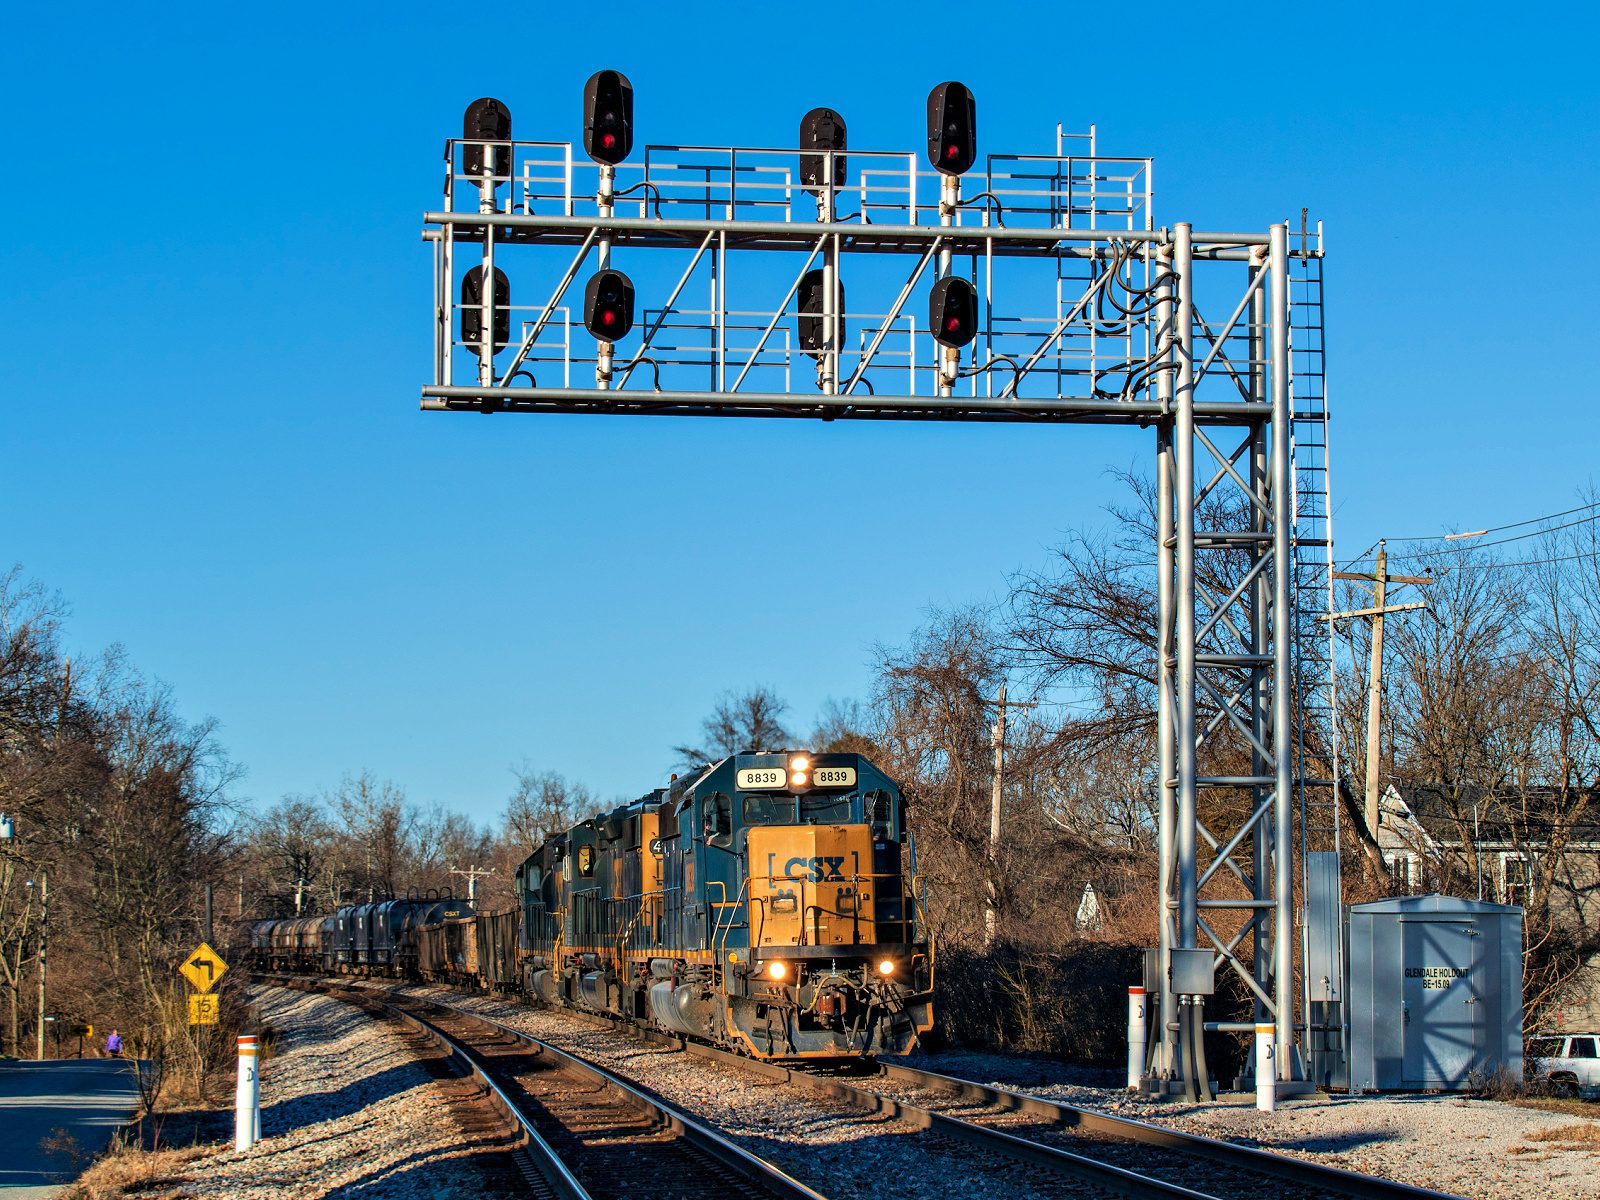 CSXT 8839 is a class EMD SD40-2 and  is pictured in Glendale, Ohio, United States.  This was taken along the Cincinnati Terminal Subdivision on the CSX Transportation. Photo Copyright: David Rohdenburg uploaded to Railroad Gallery on 02/13/2023. This photograph of CSXT 8839 was taken on Sunday, February 12, 2023. All Rights Reserved. 